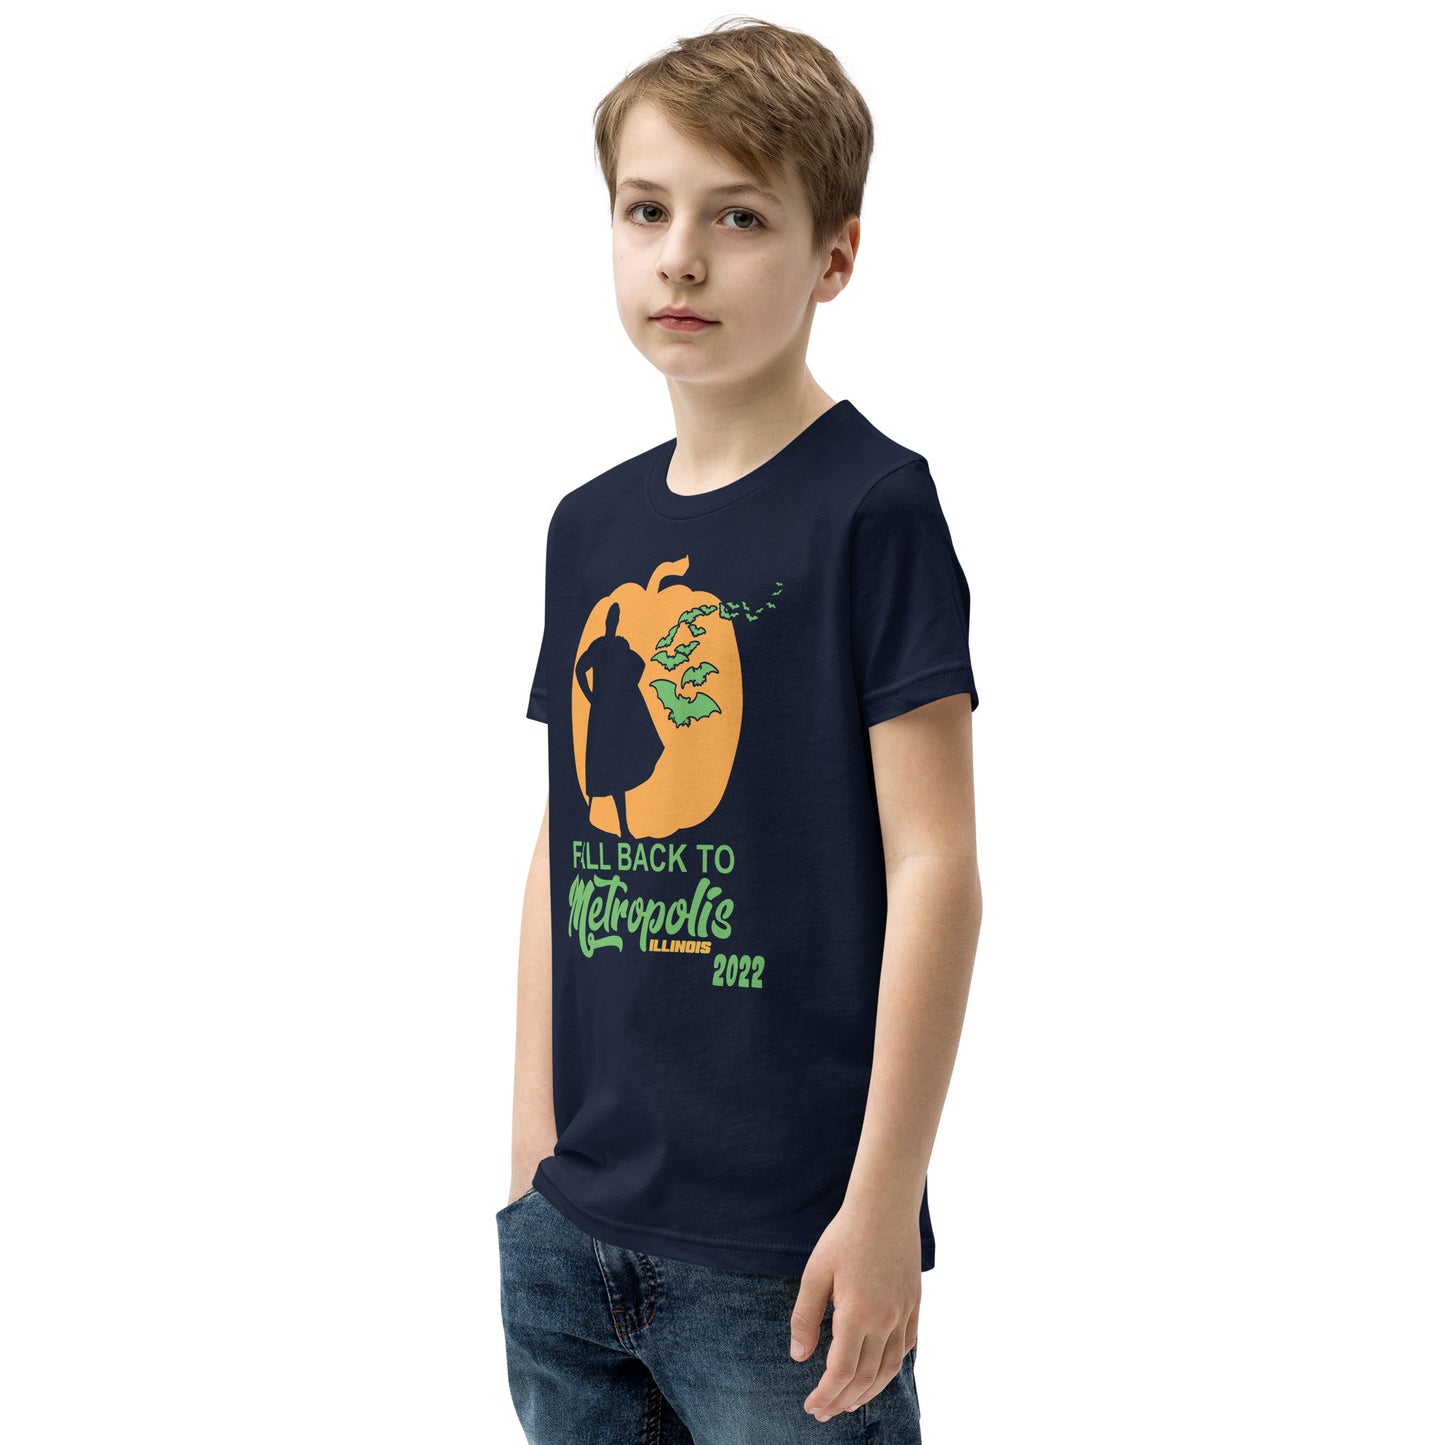 Fall Back to Metropolis 2022 Limited Edition Event Youth Short Sleeve Shirt